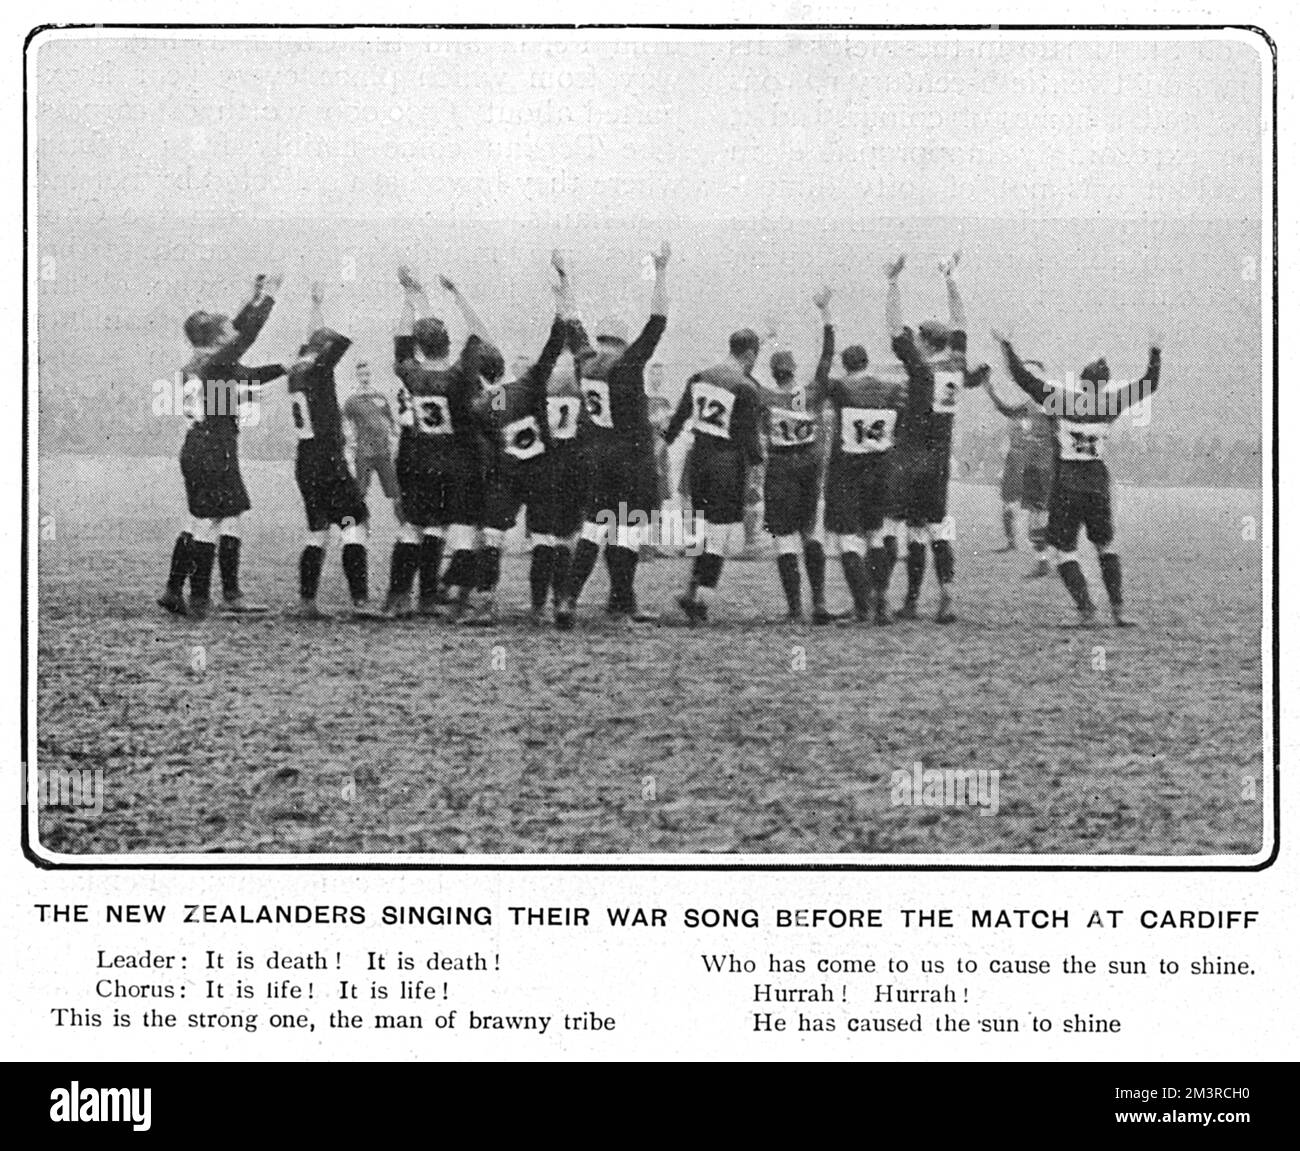 The New Zealand rugby team singing their war song before the match against Wales at Cardiff on 16th December 1905. Wales went on to win a historic victory against the New Zealanders.     Date: 16th December 1905 Stock Photo